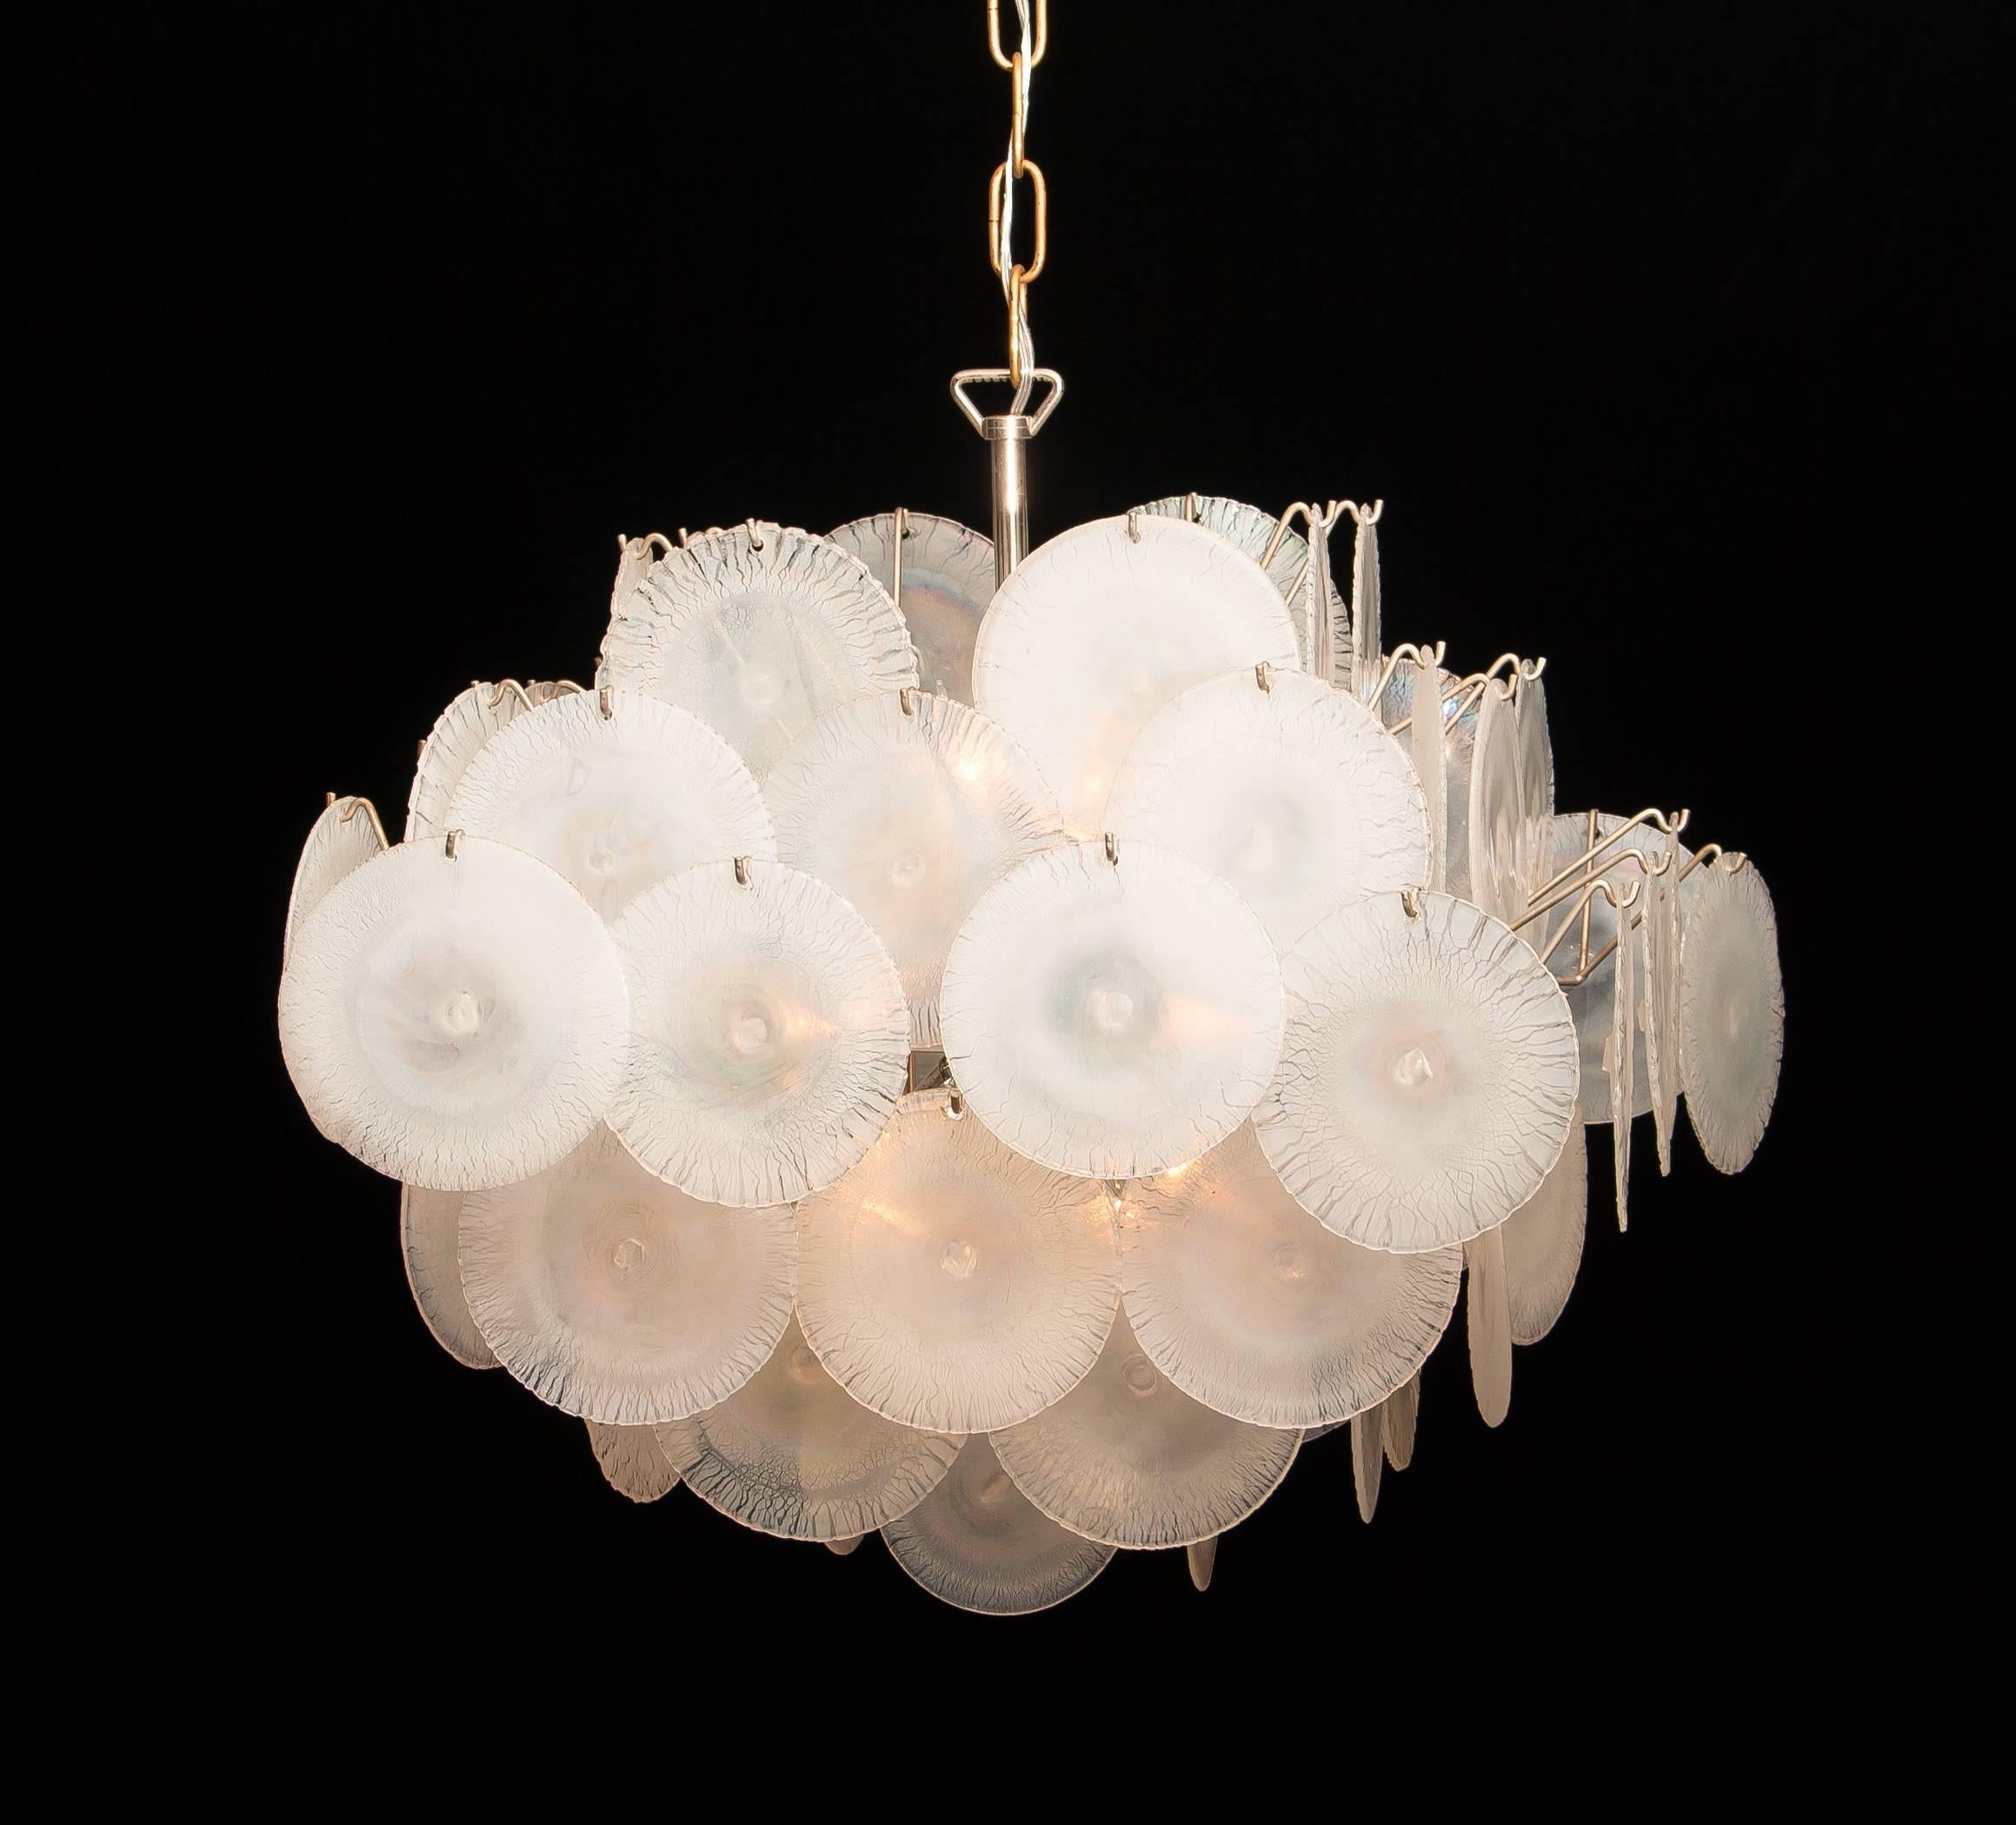 Set of Two Gino Vistosi Chandeliers with White / Pearl Murano Crystal Discs 10